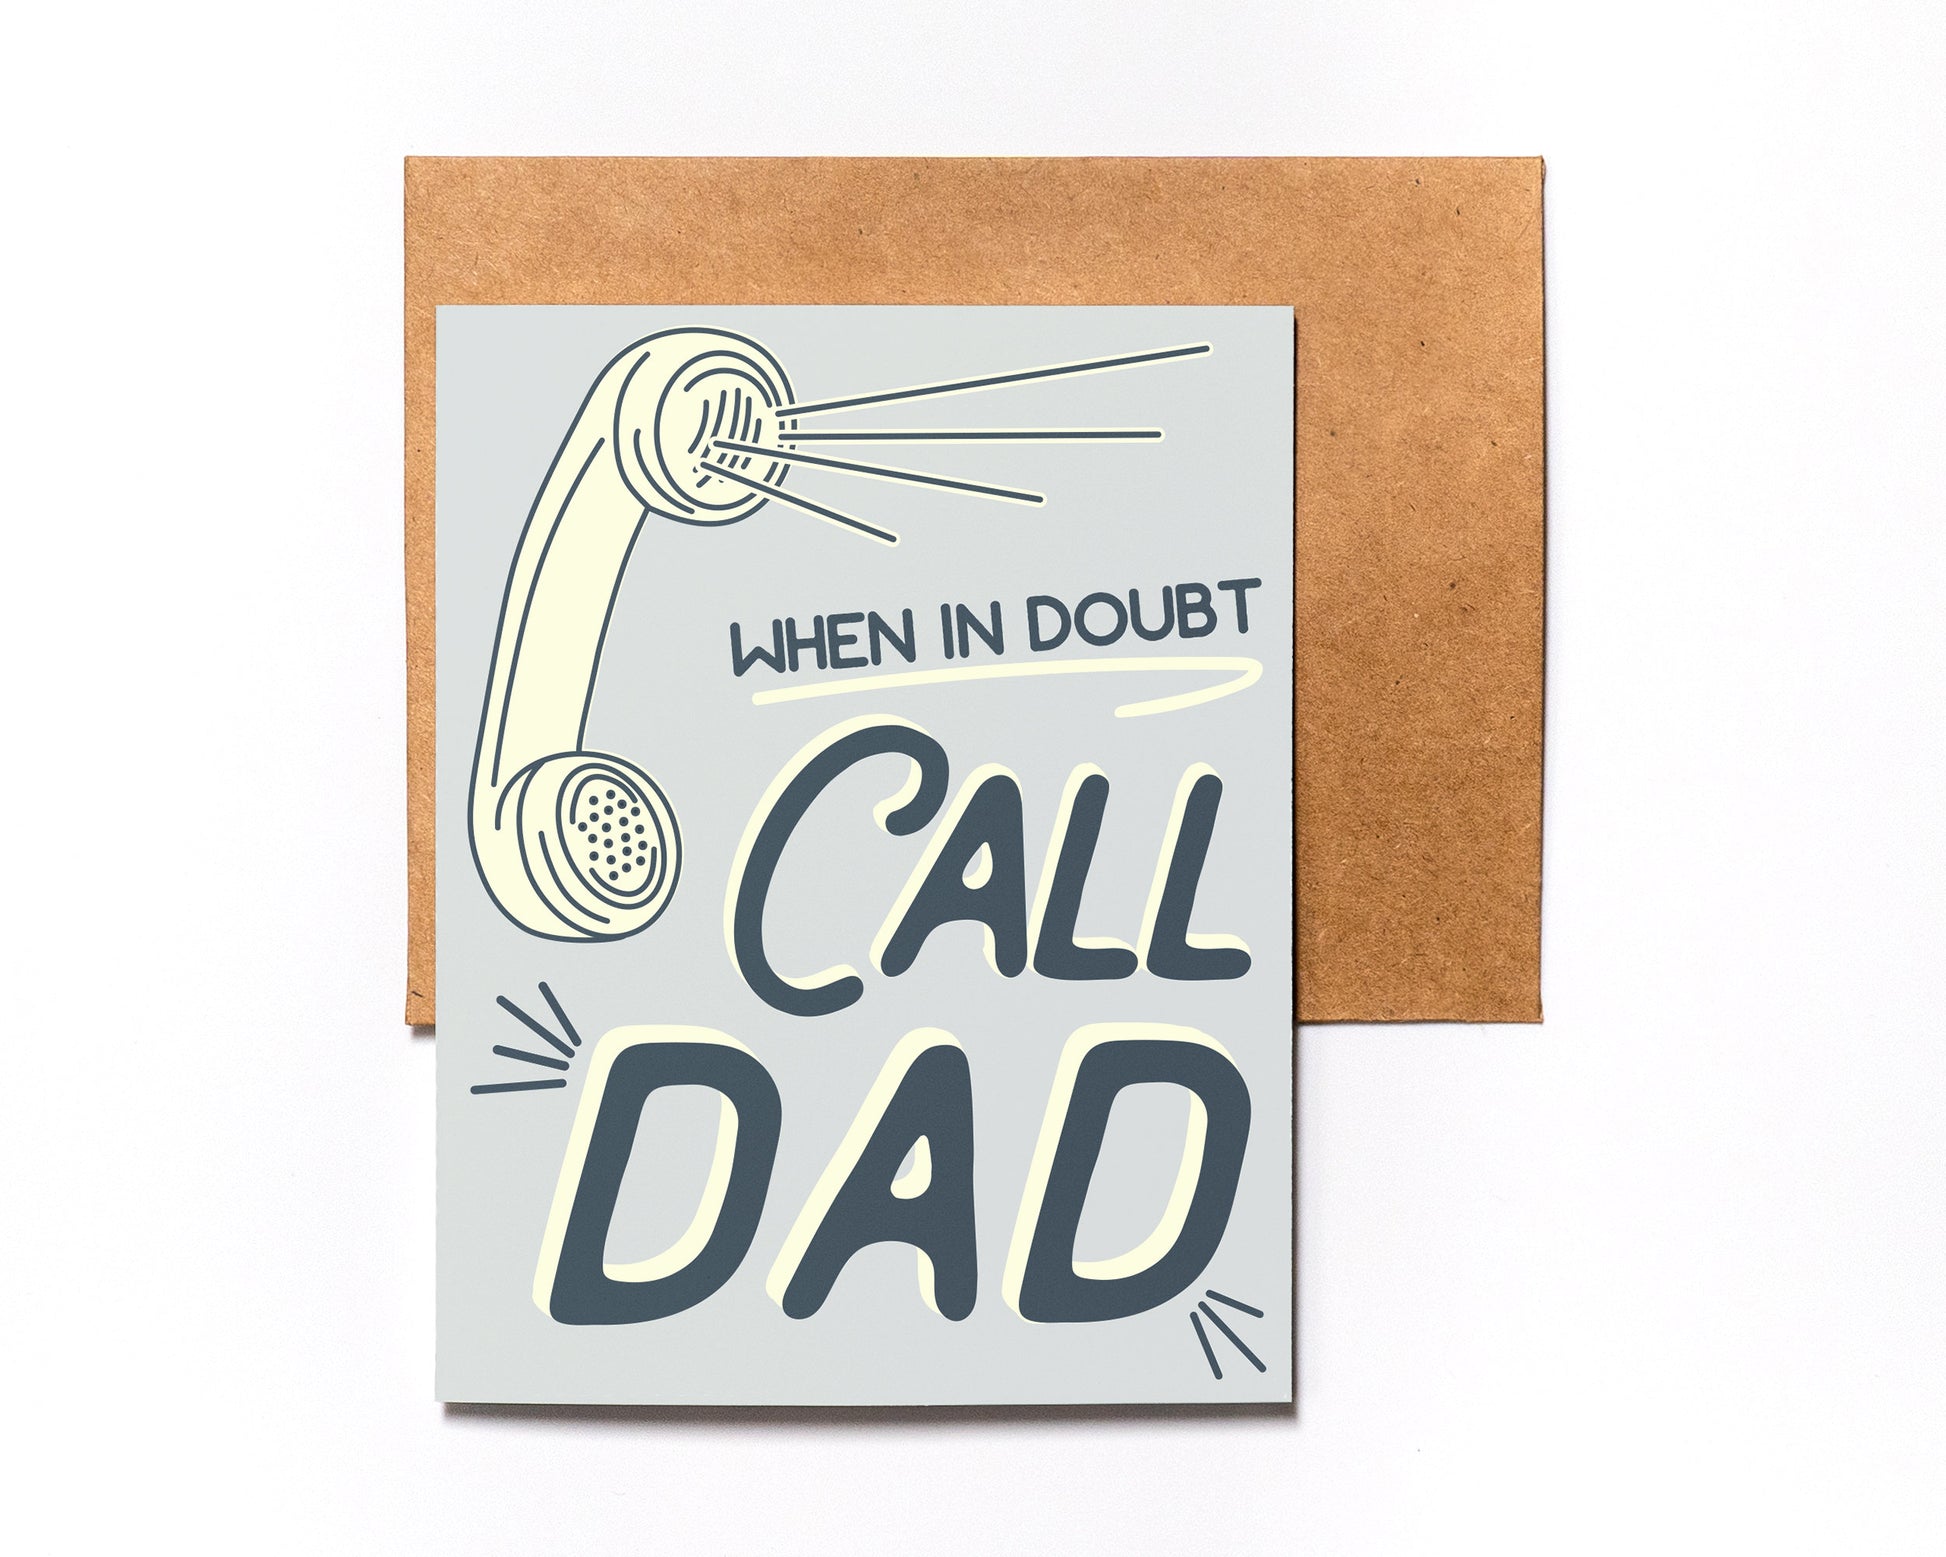 Father's Day Card | When In Doubt Call Dad - Folded - Wishing You a Happy Father's Day - Father's Day Gift Idea - Funny - Unique Card